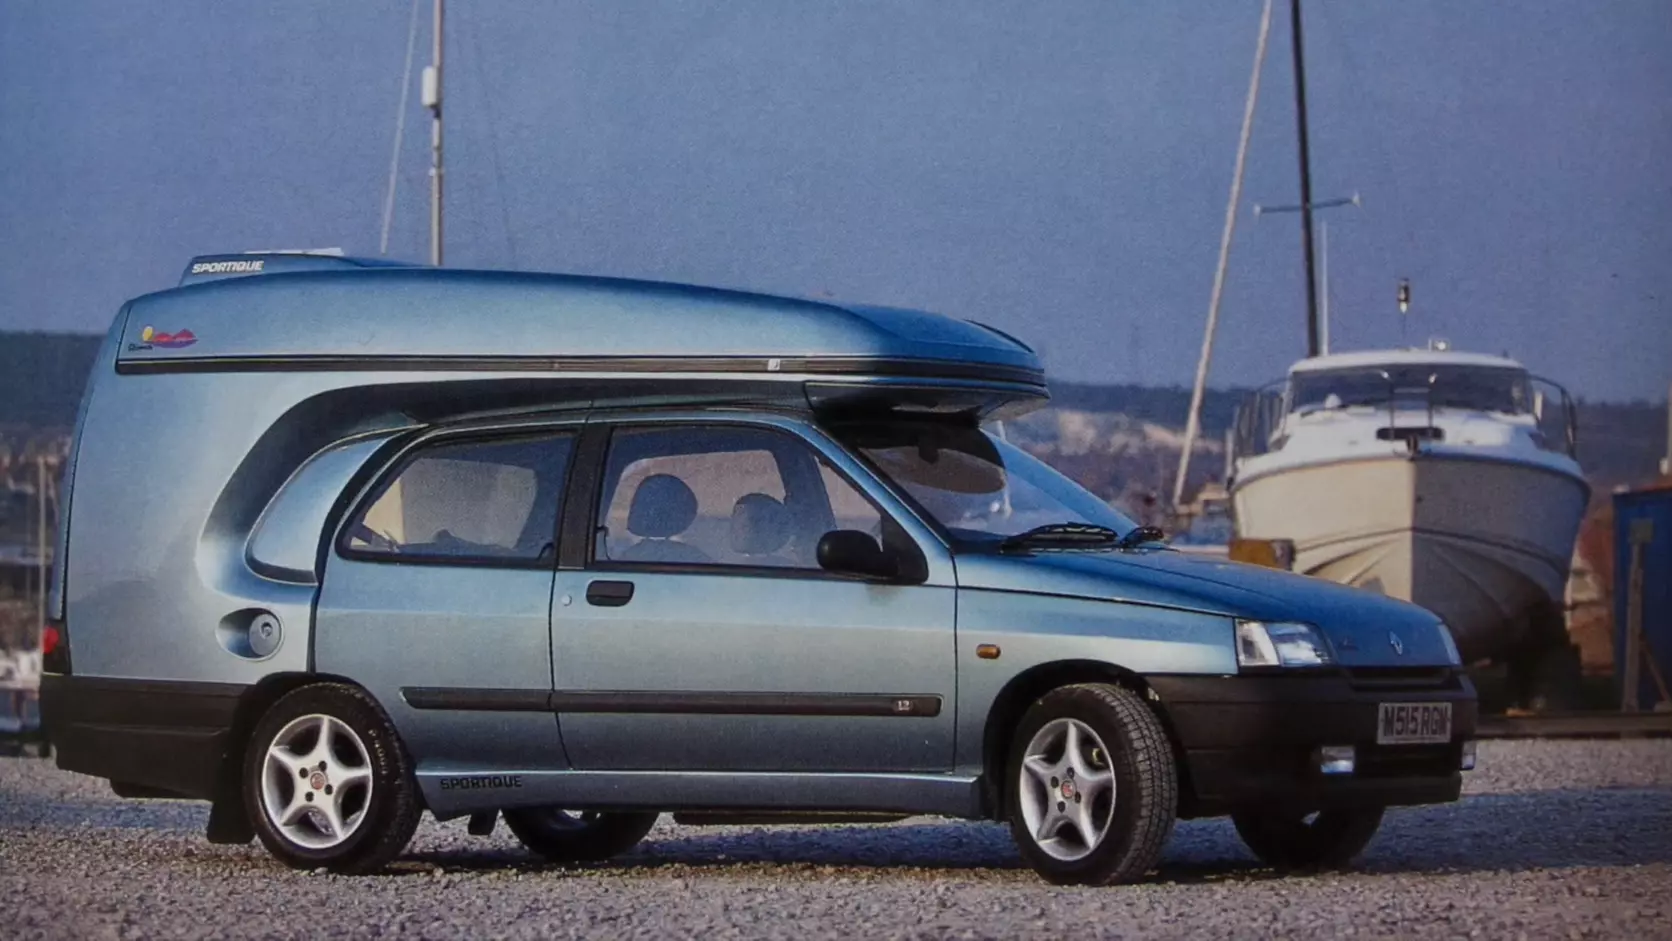 I’m Obsessed With This Weird-Looking Hatchback Converted Into a Camper Van | Autance